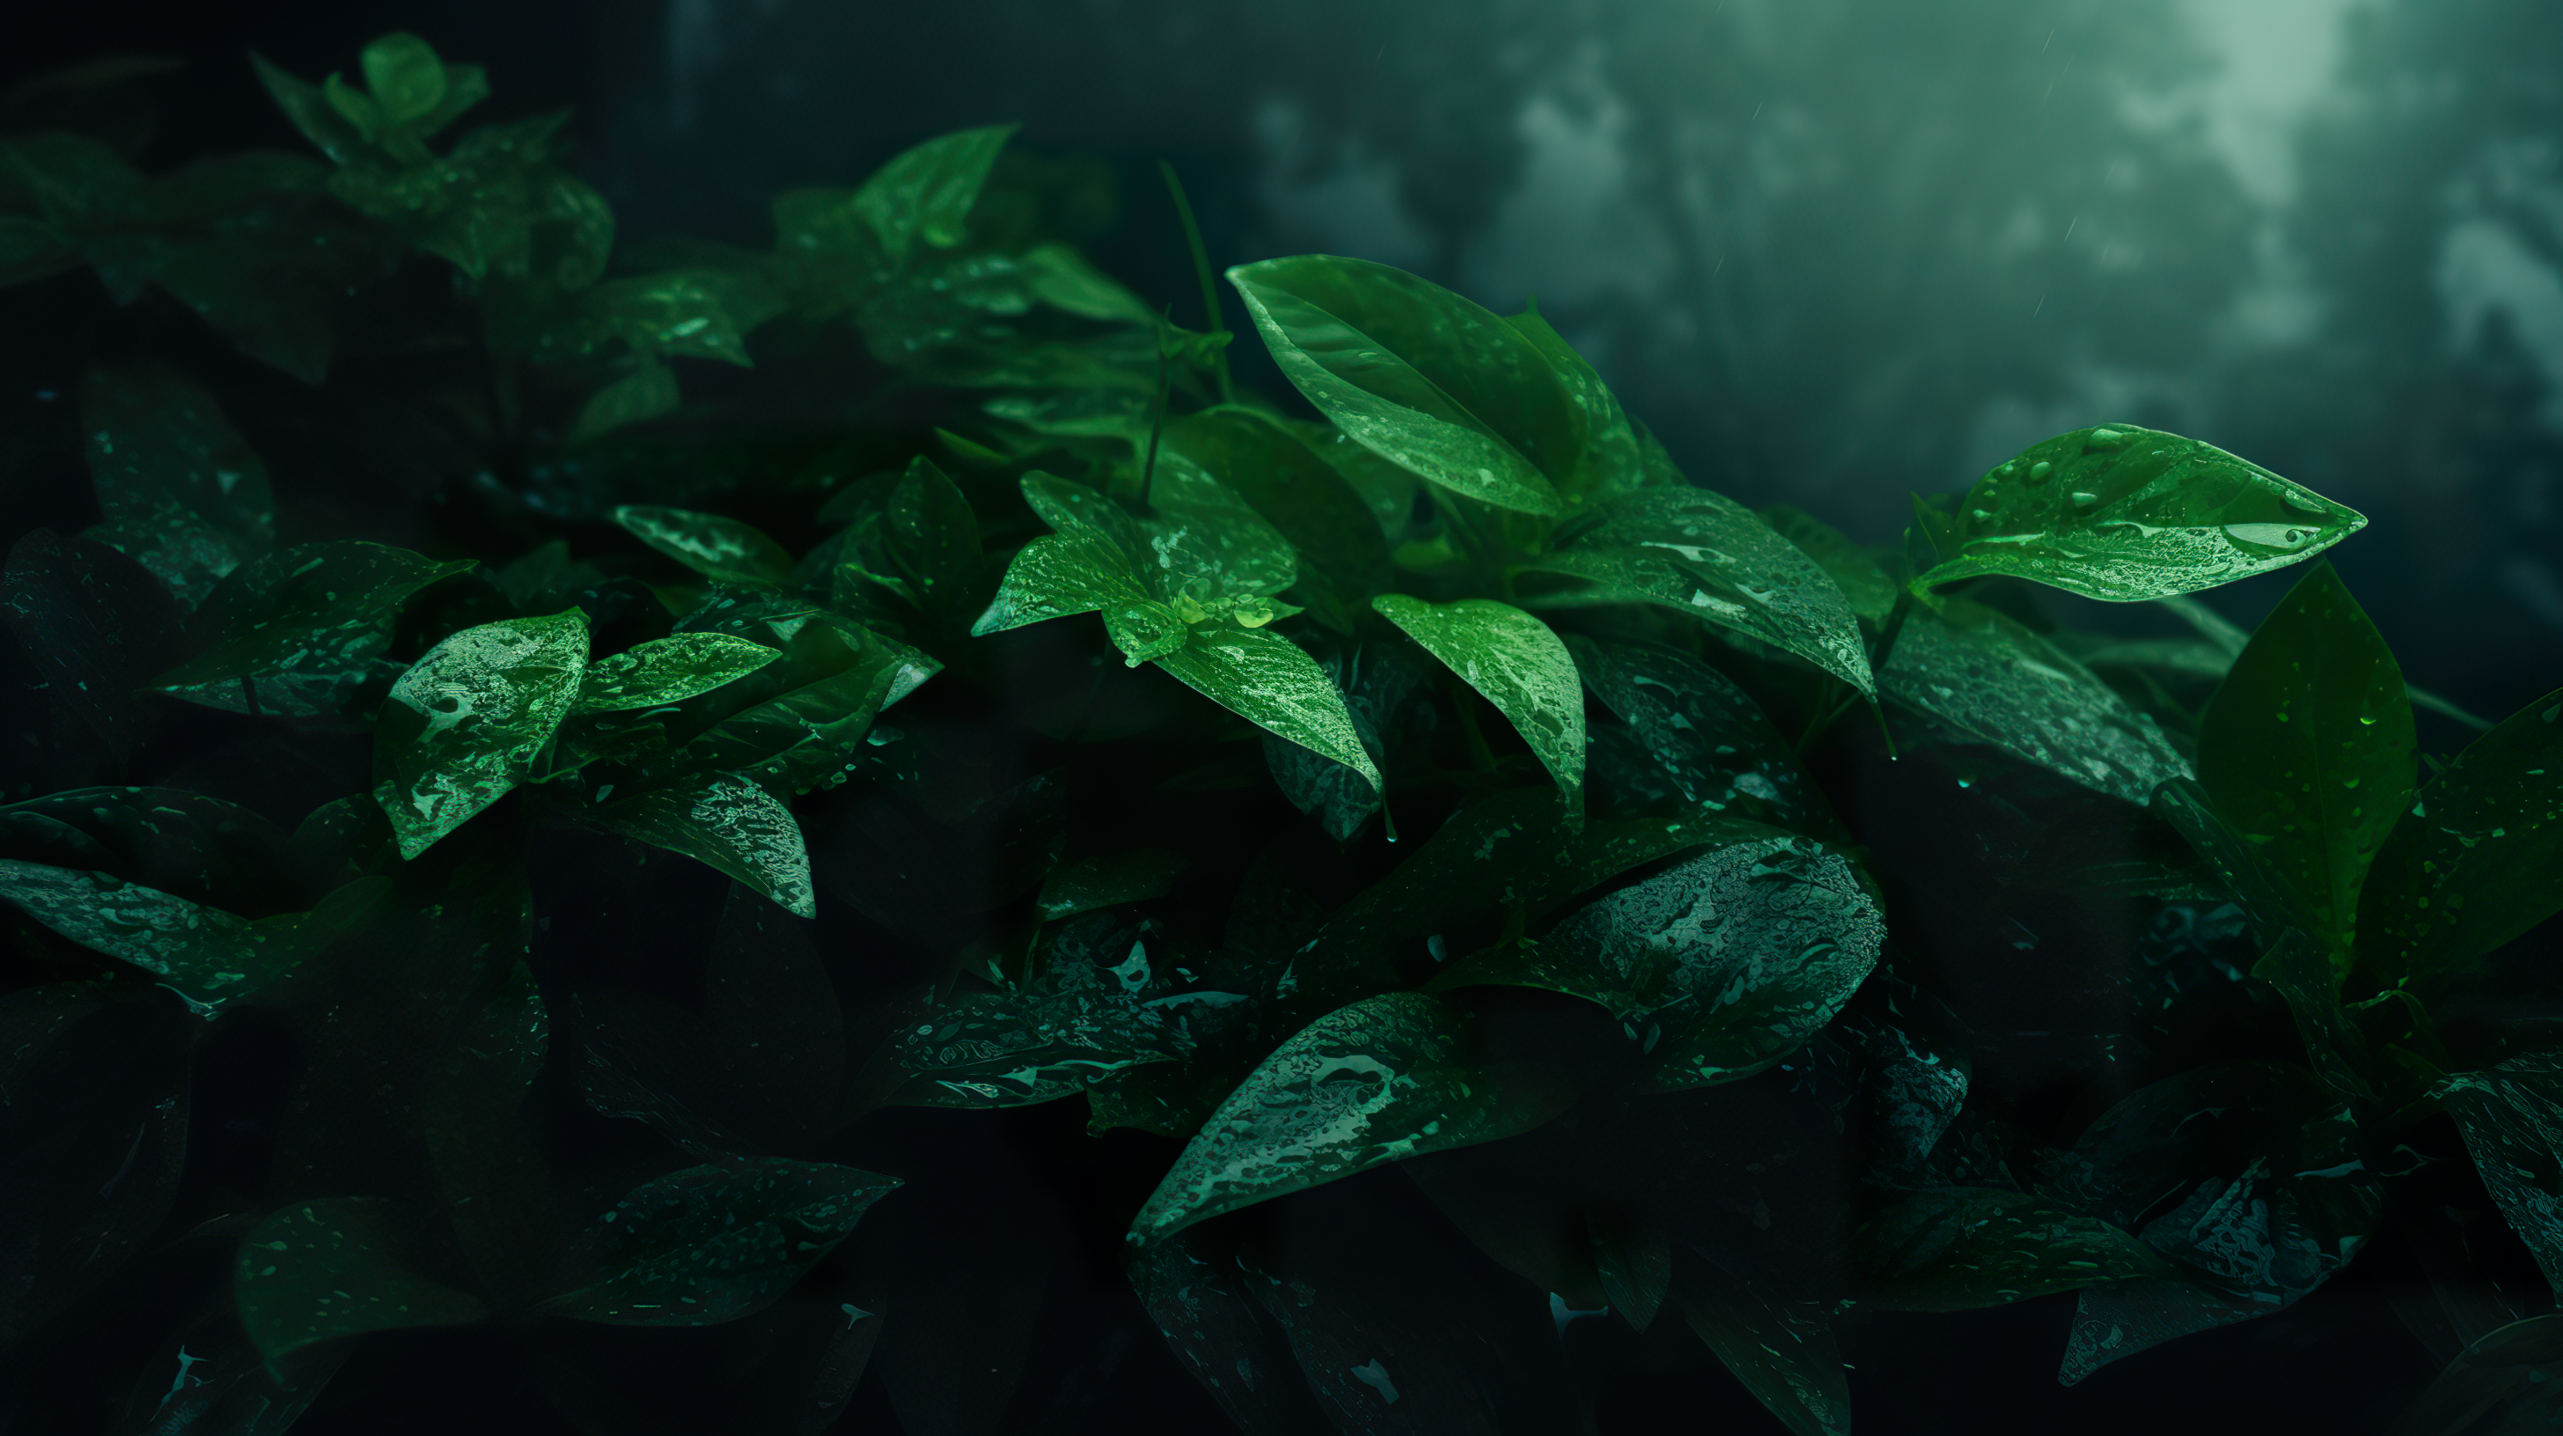 1400 Leaf HD Wallpapers and Backgrounds